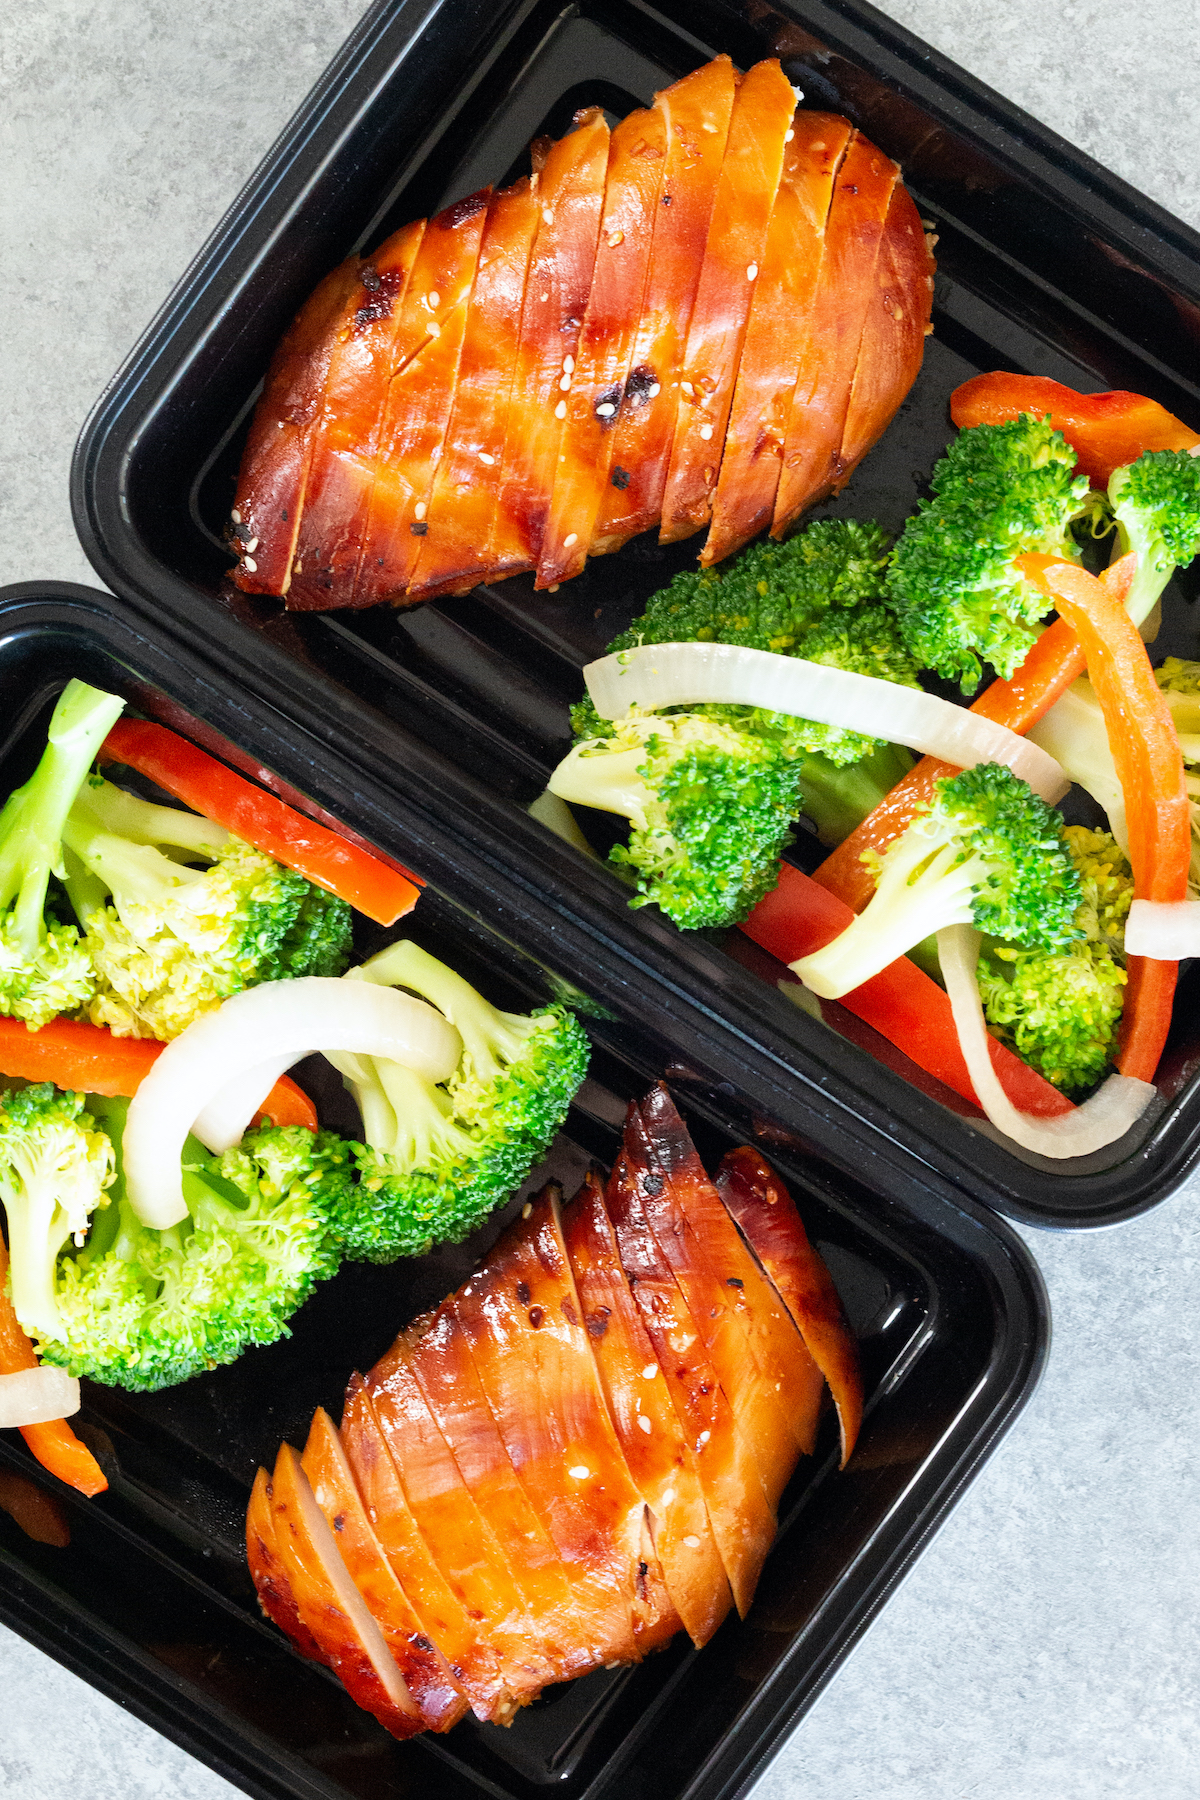 Overhead view of two black plastic meal prep containers filled with sliced teriyaki chicken breast and broccoli, peppers, and onions.